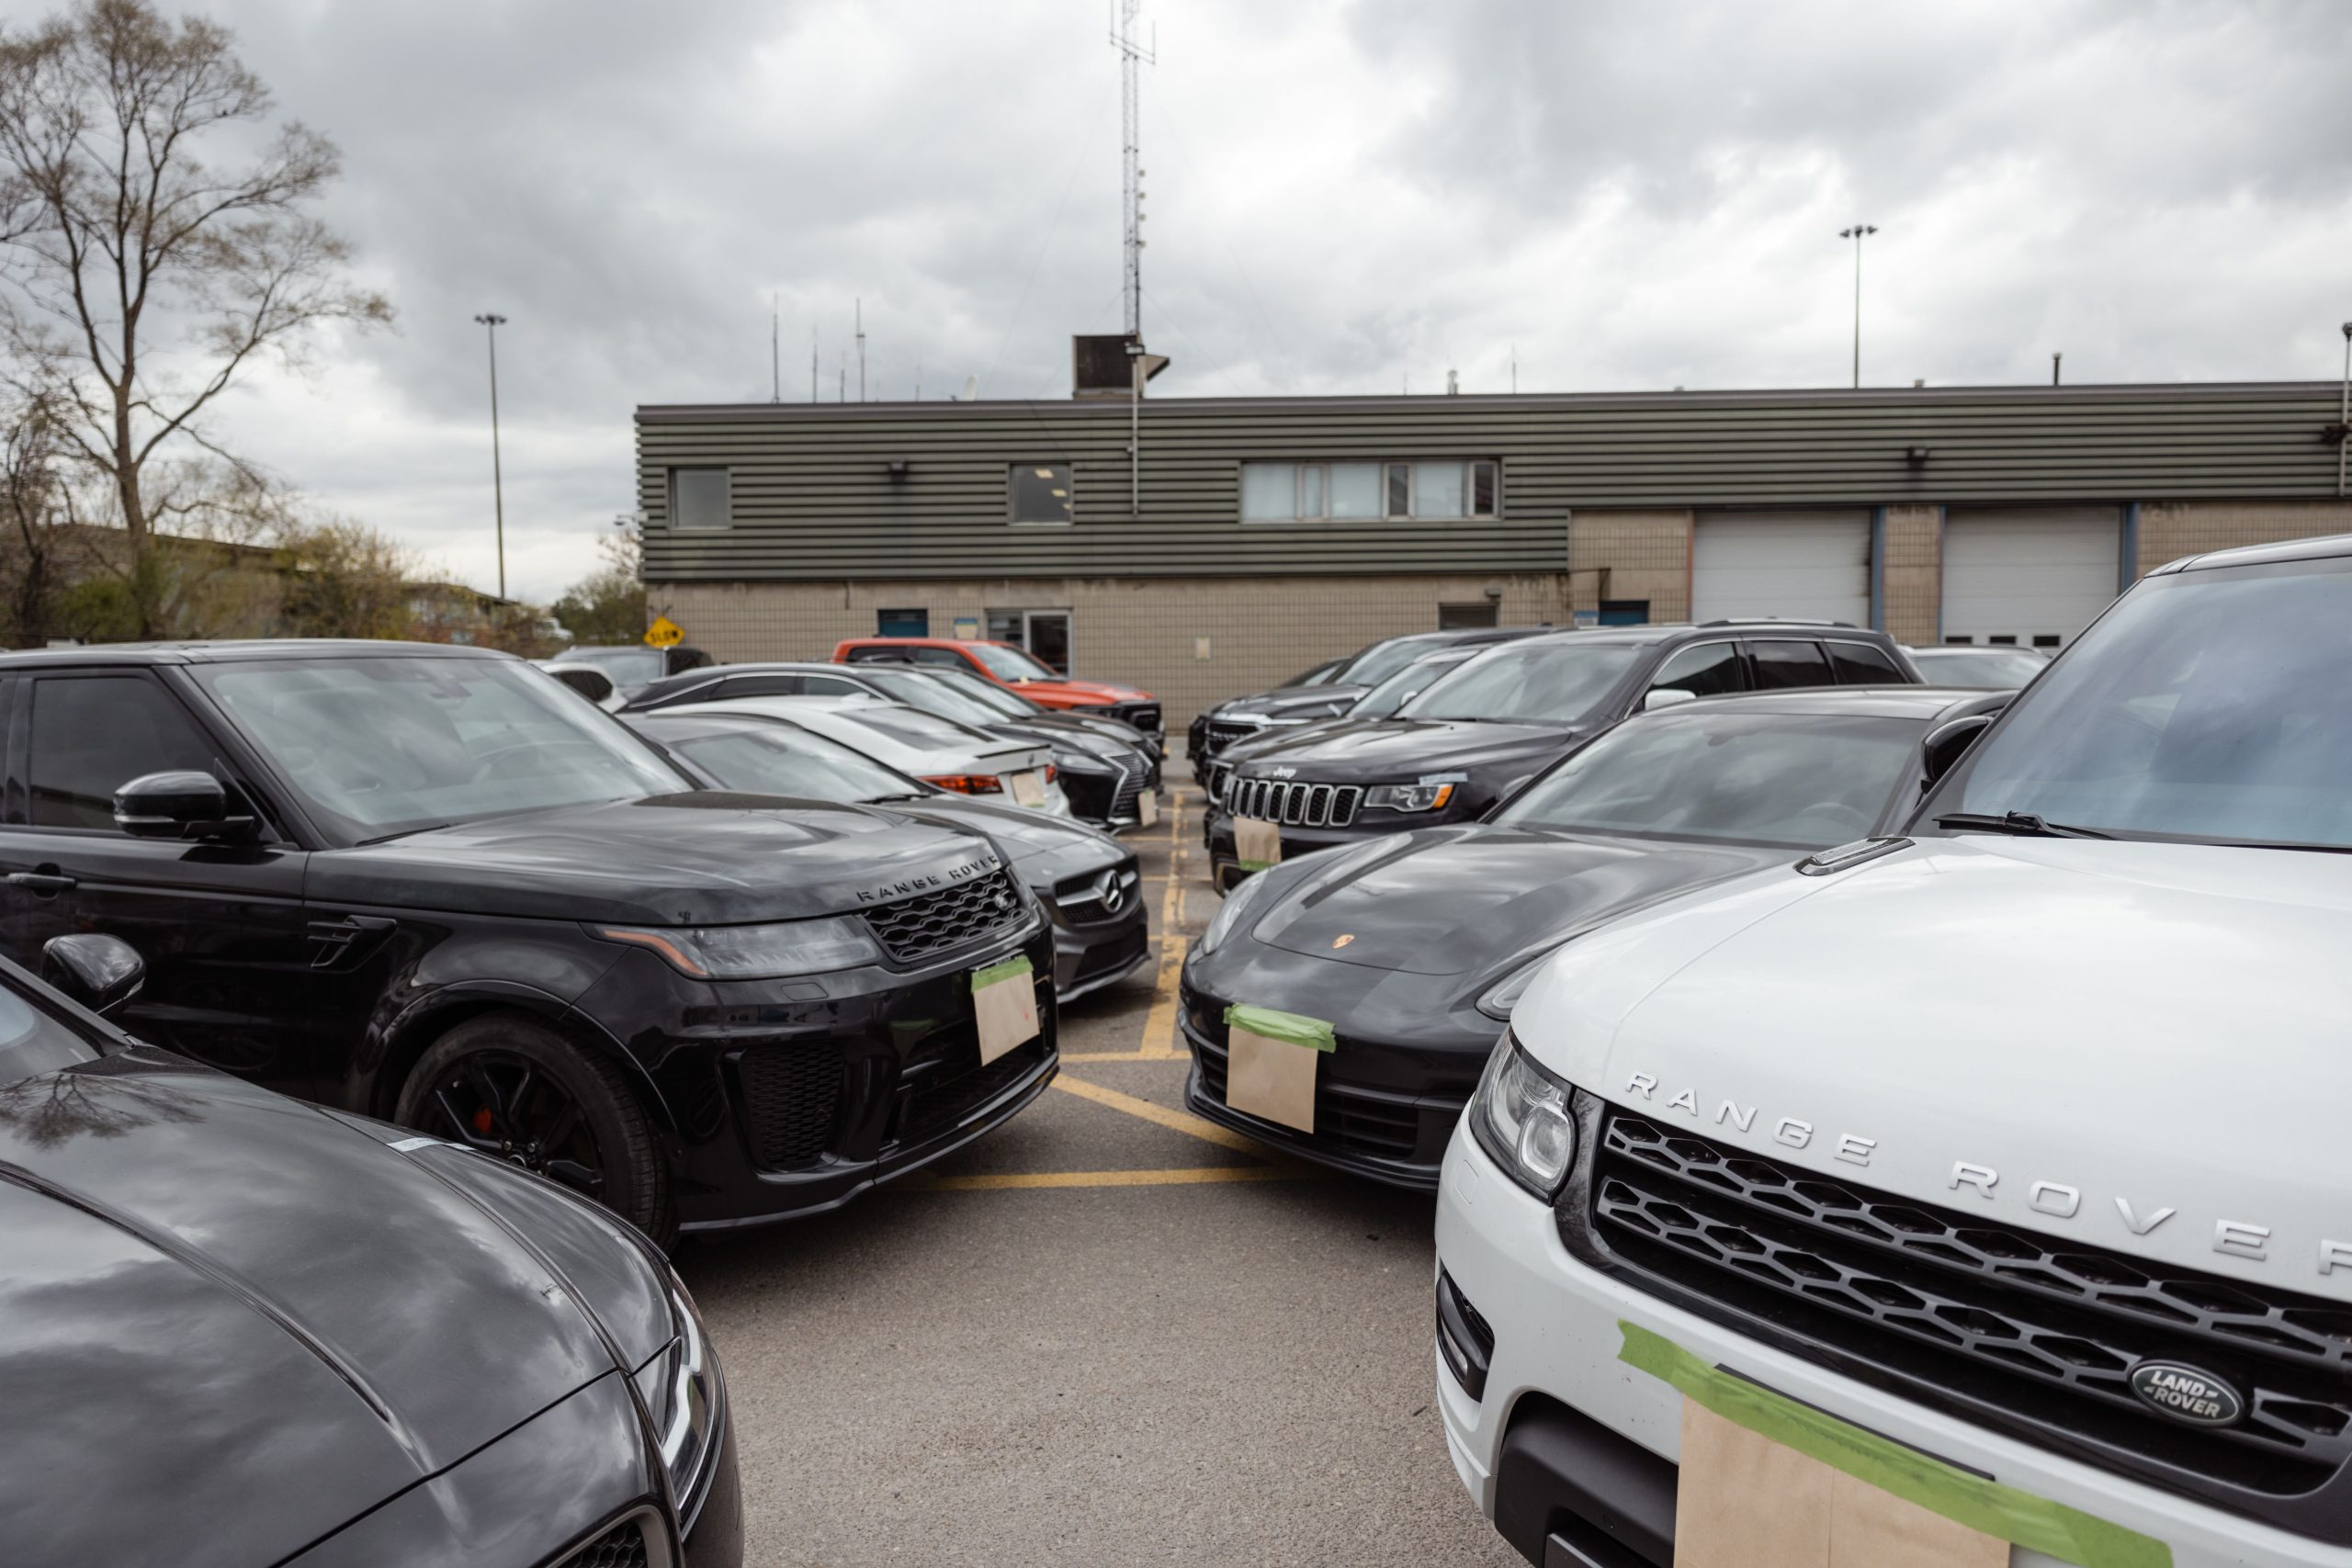 Over 550 stolen vehicles valued at 27M recovered in Toronto